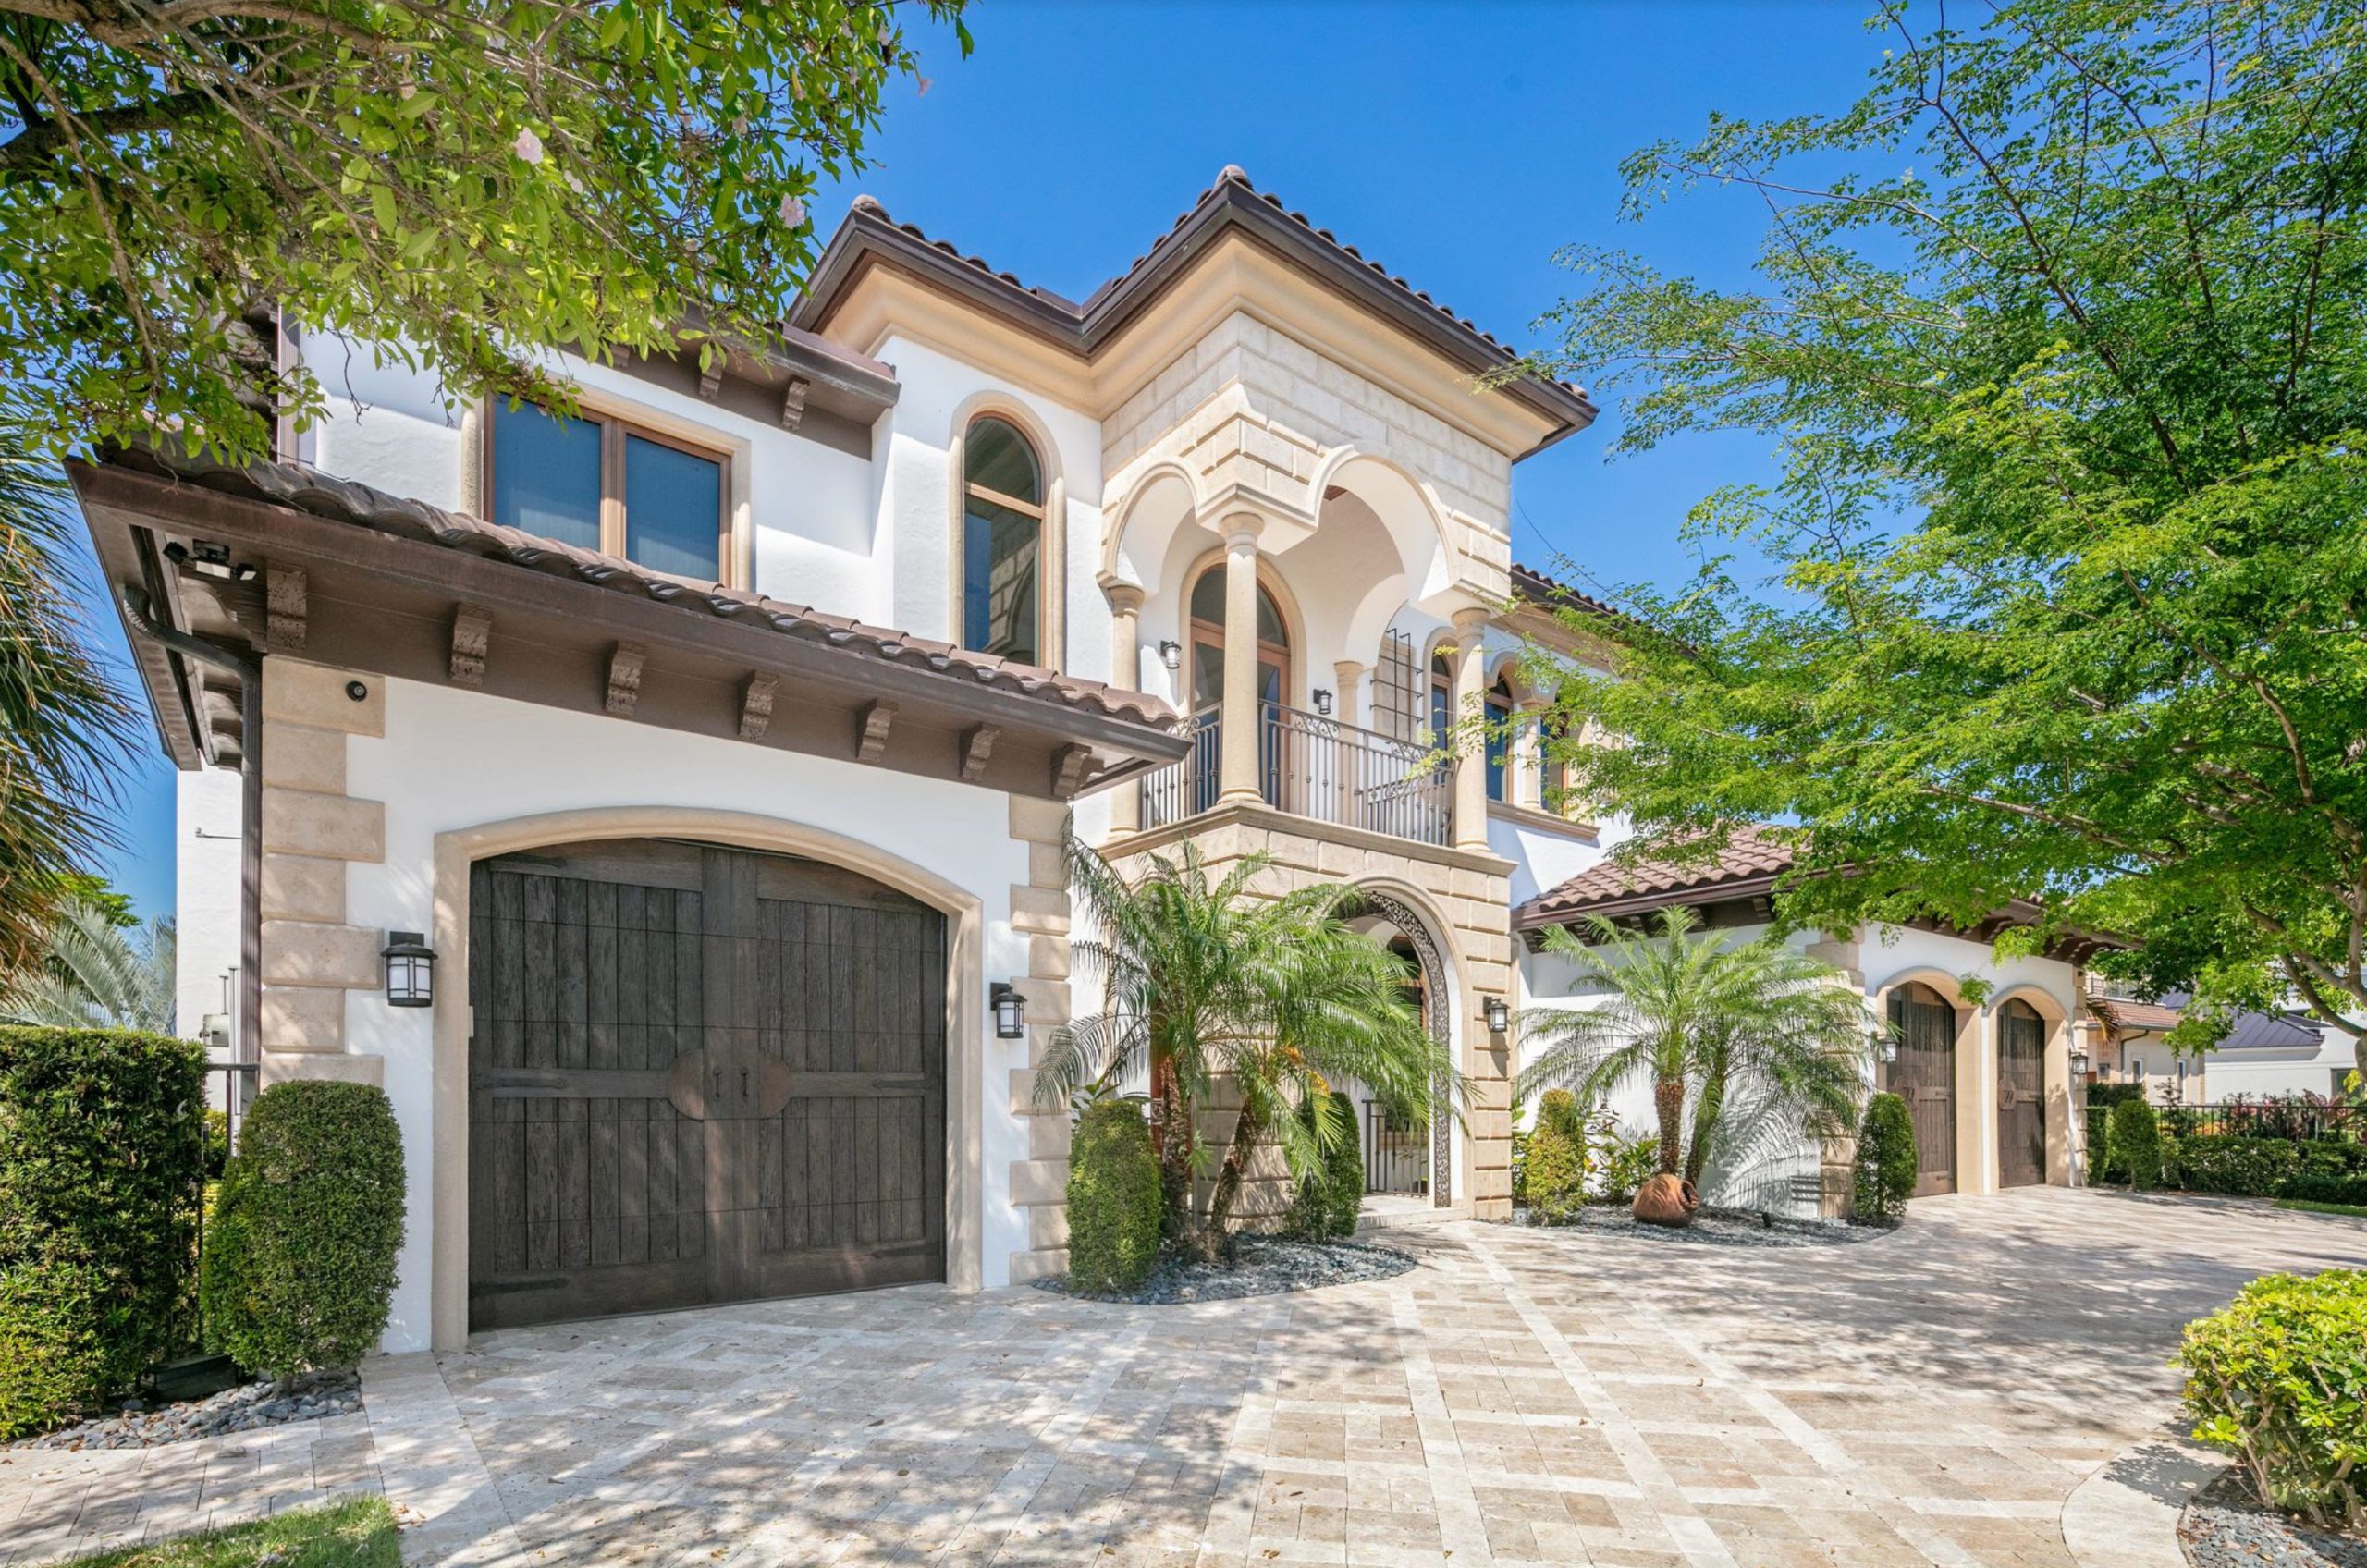 Four Ways to Sell Your Home Quickly in Fort Lauderdale